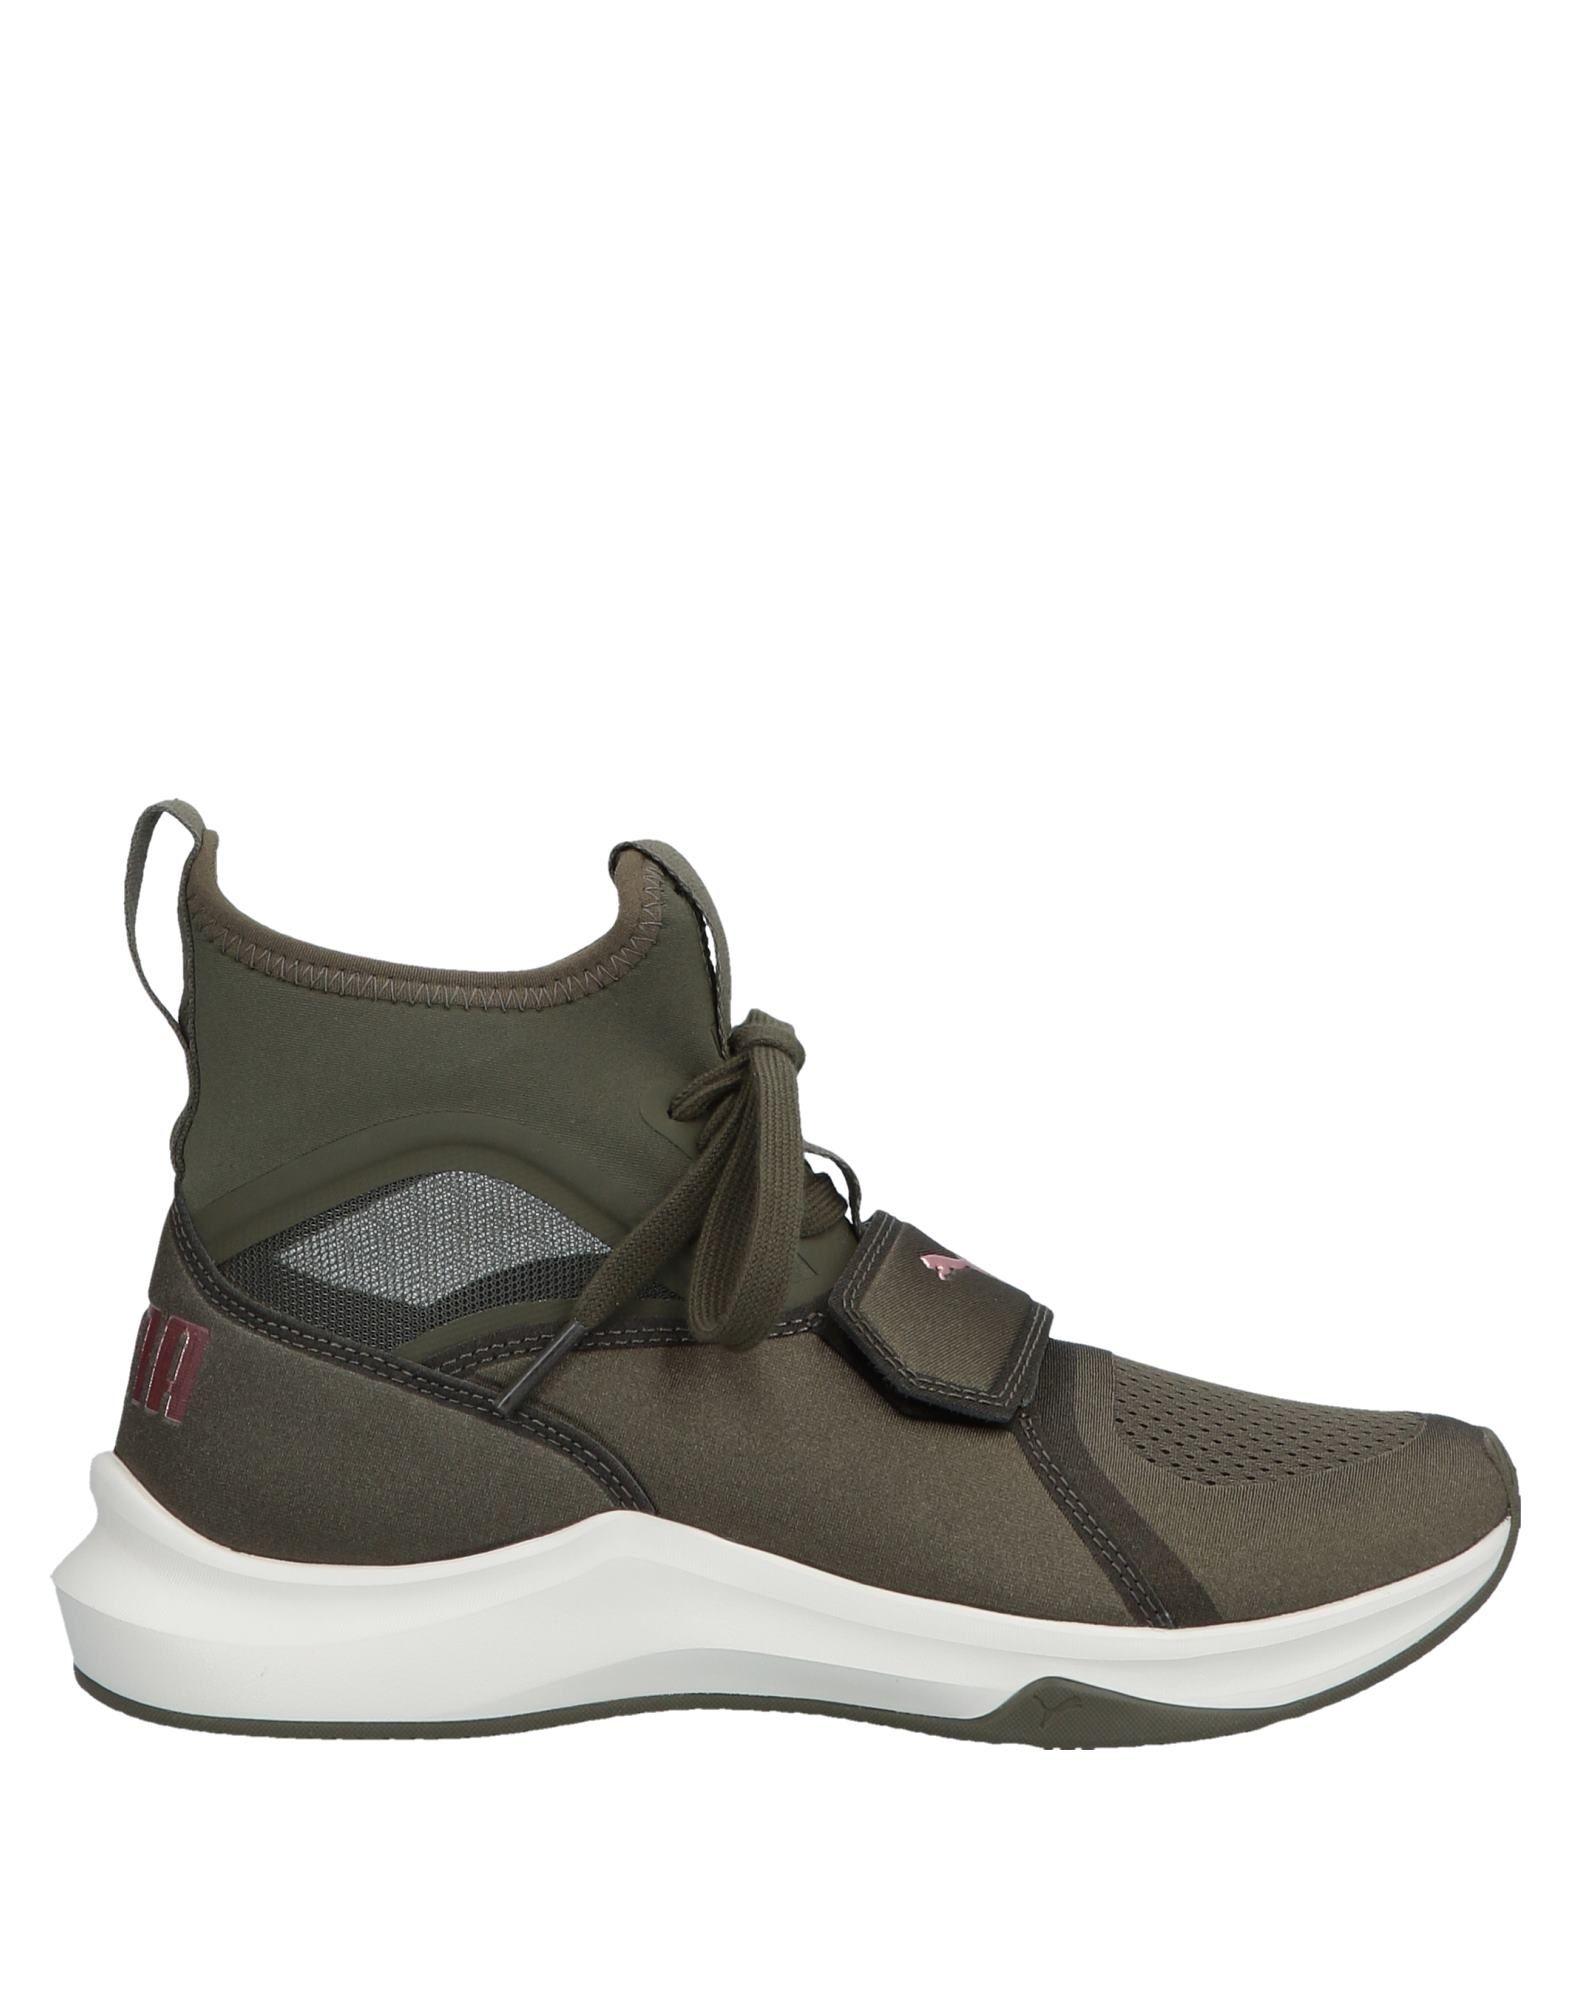 PUMA Satin High-tops & Sneakers in Military Green (Green) - Lyst